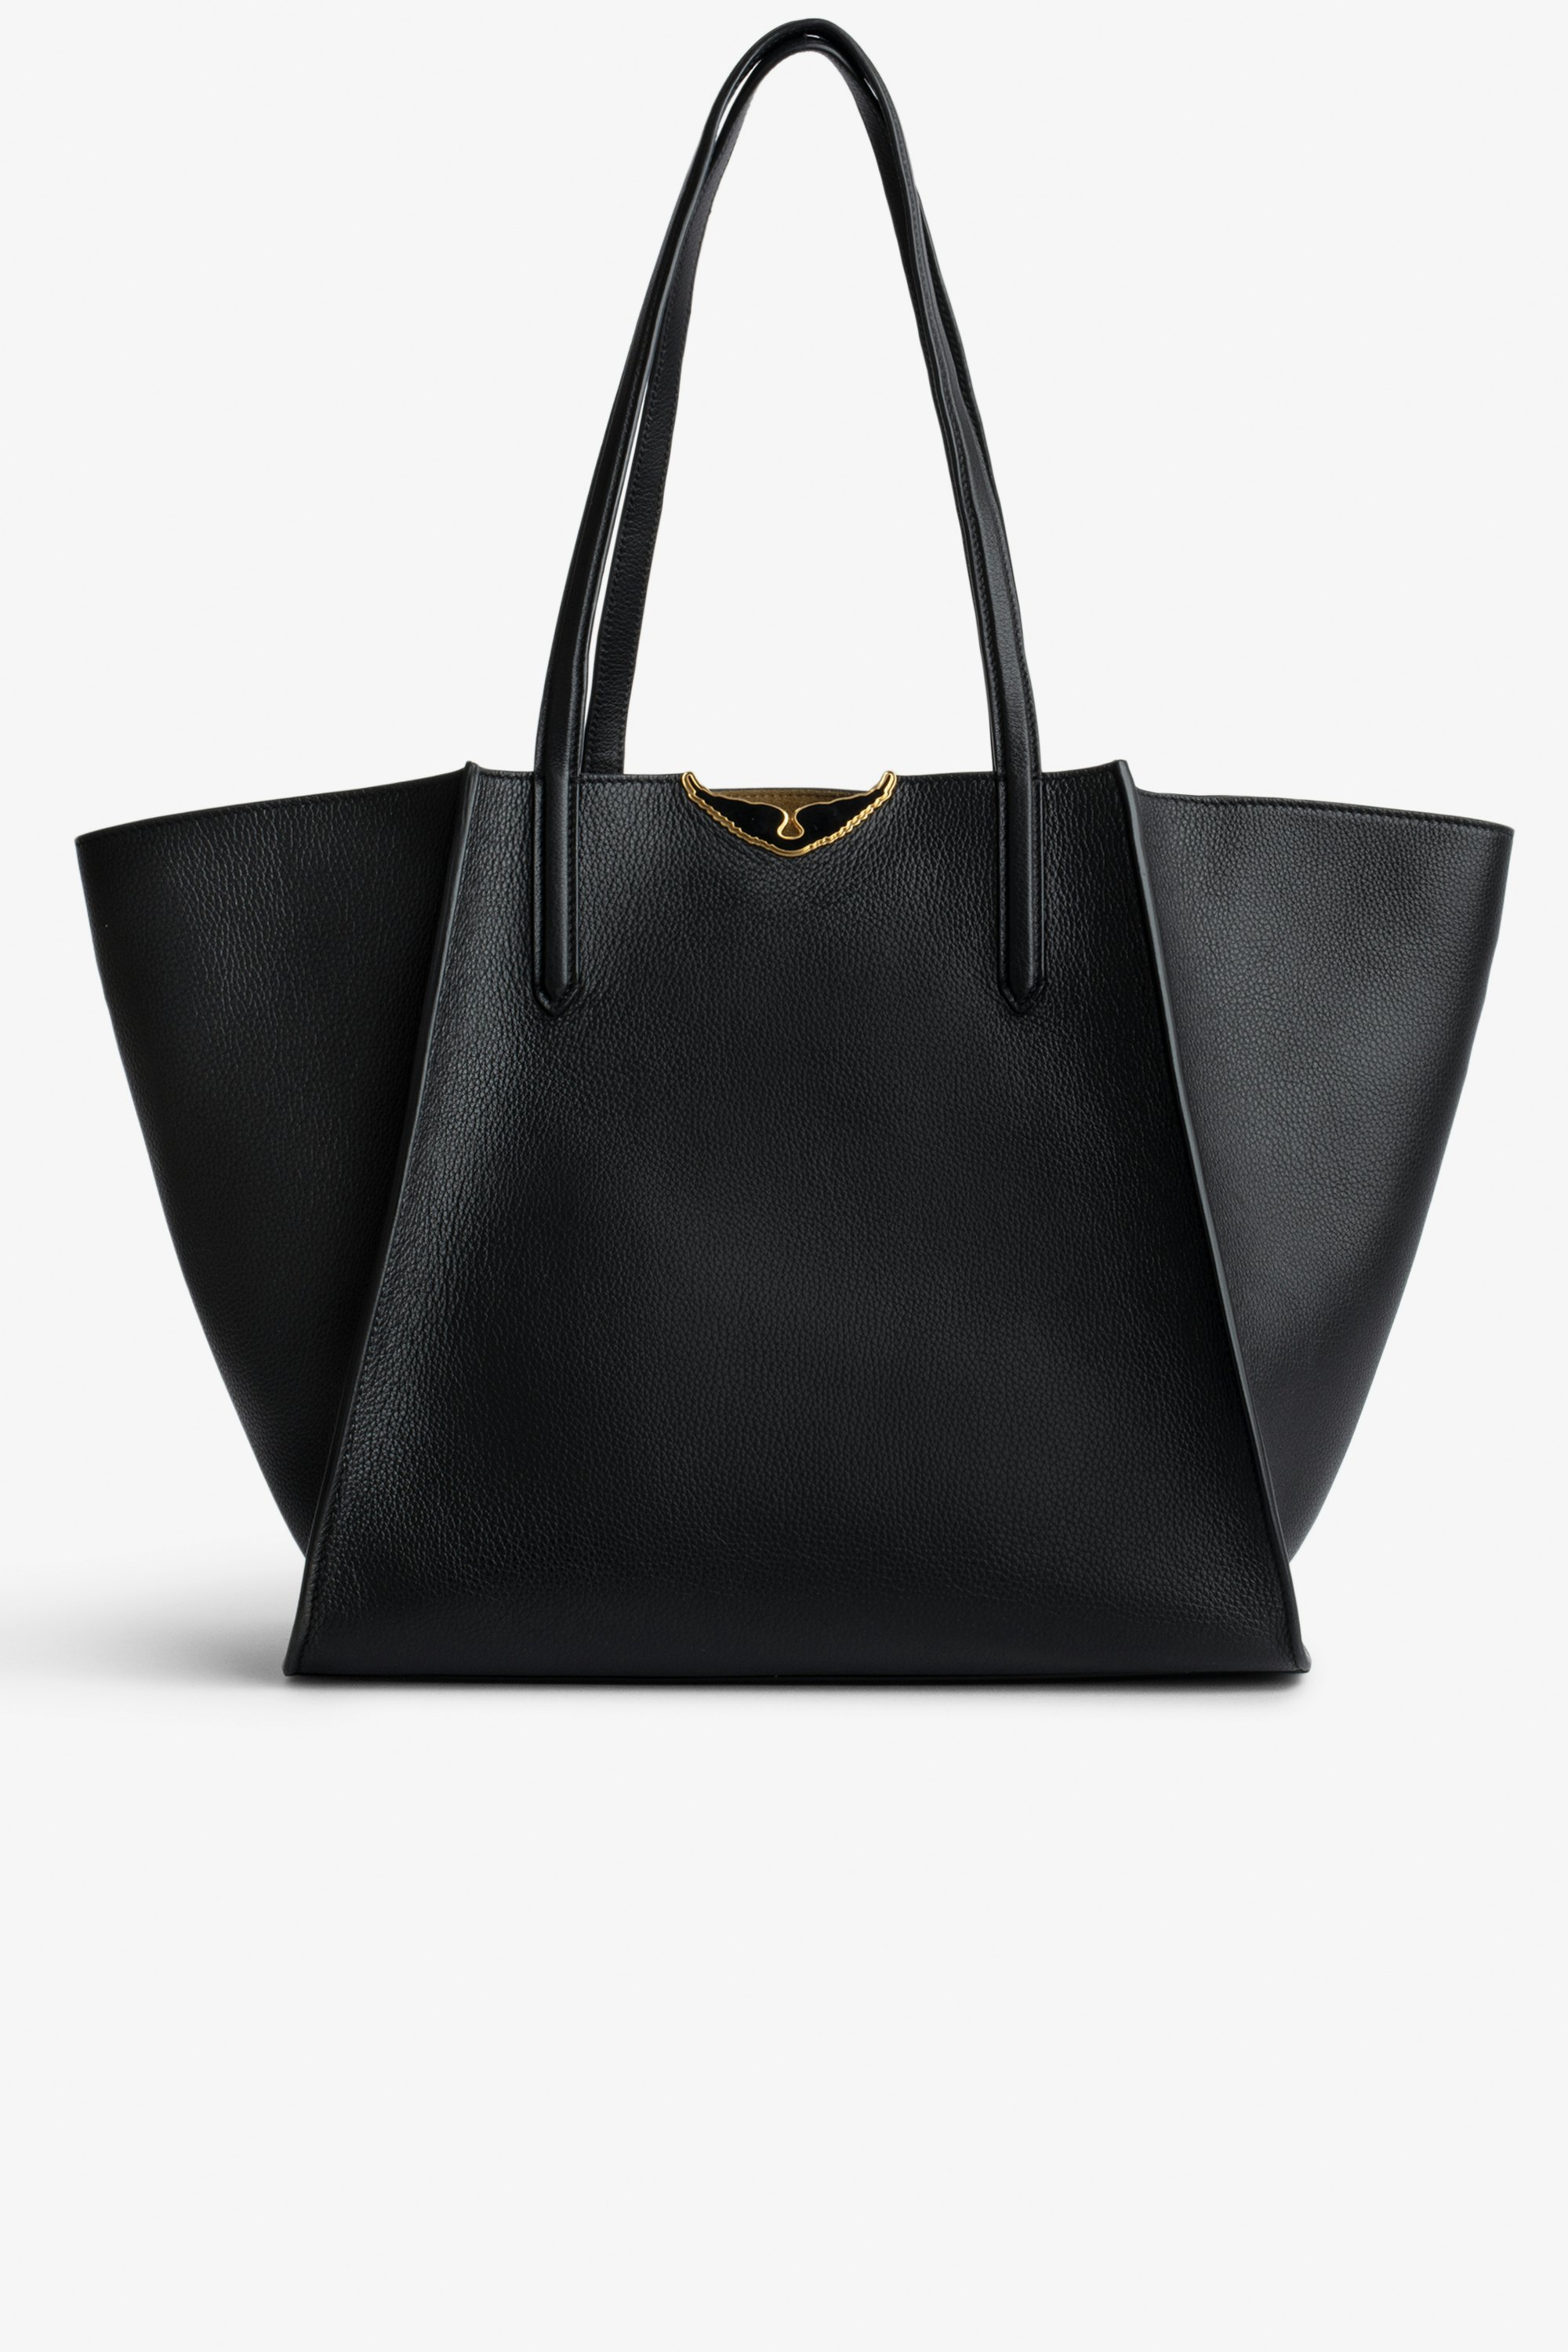 Le Borderline Bag - Women's tote bag in black grained leather and khaki suede with black lacquered wings